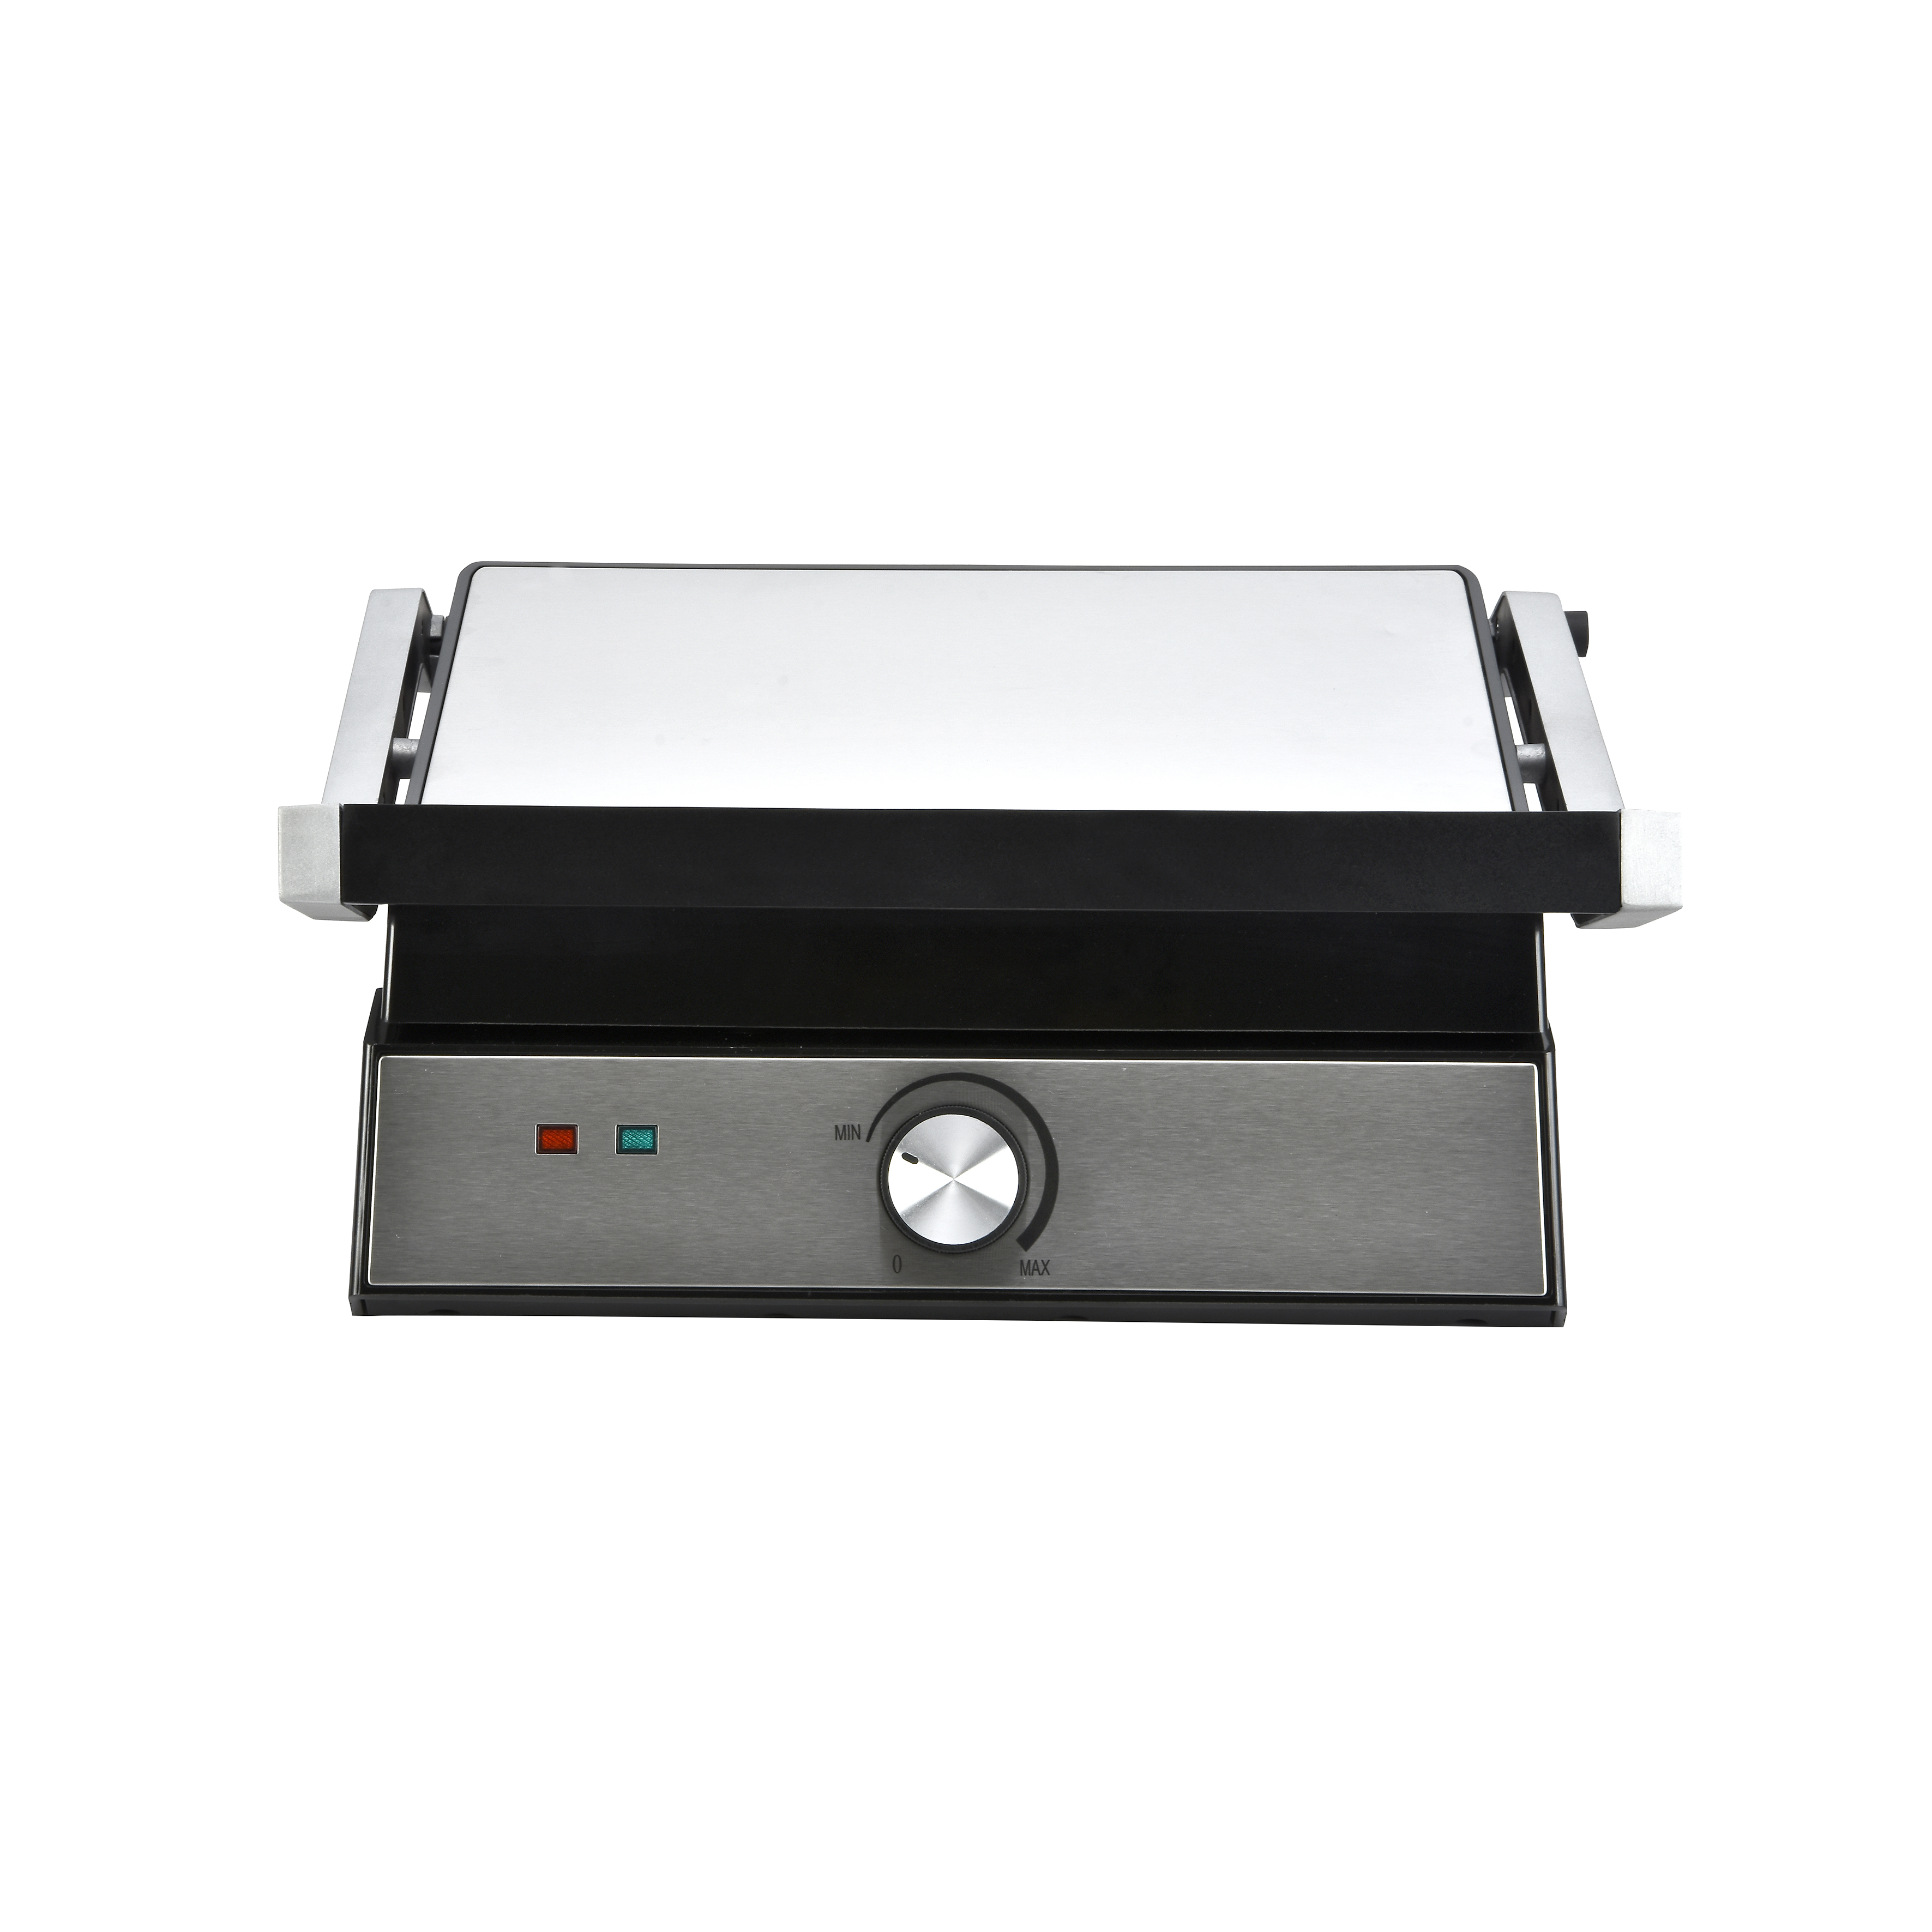 2020 New Hot Sale Automatic Stainless Steel BBQ Grill/Professional Non-stick Electric Griddle/Sandwich Press Panini Grill